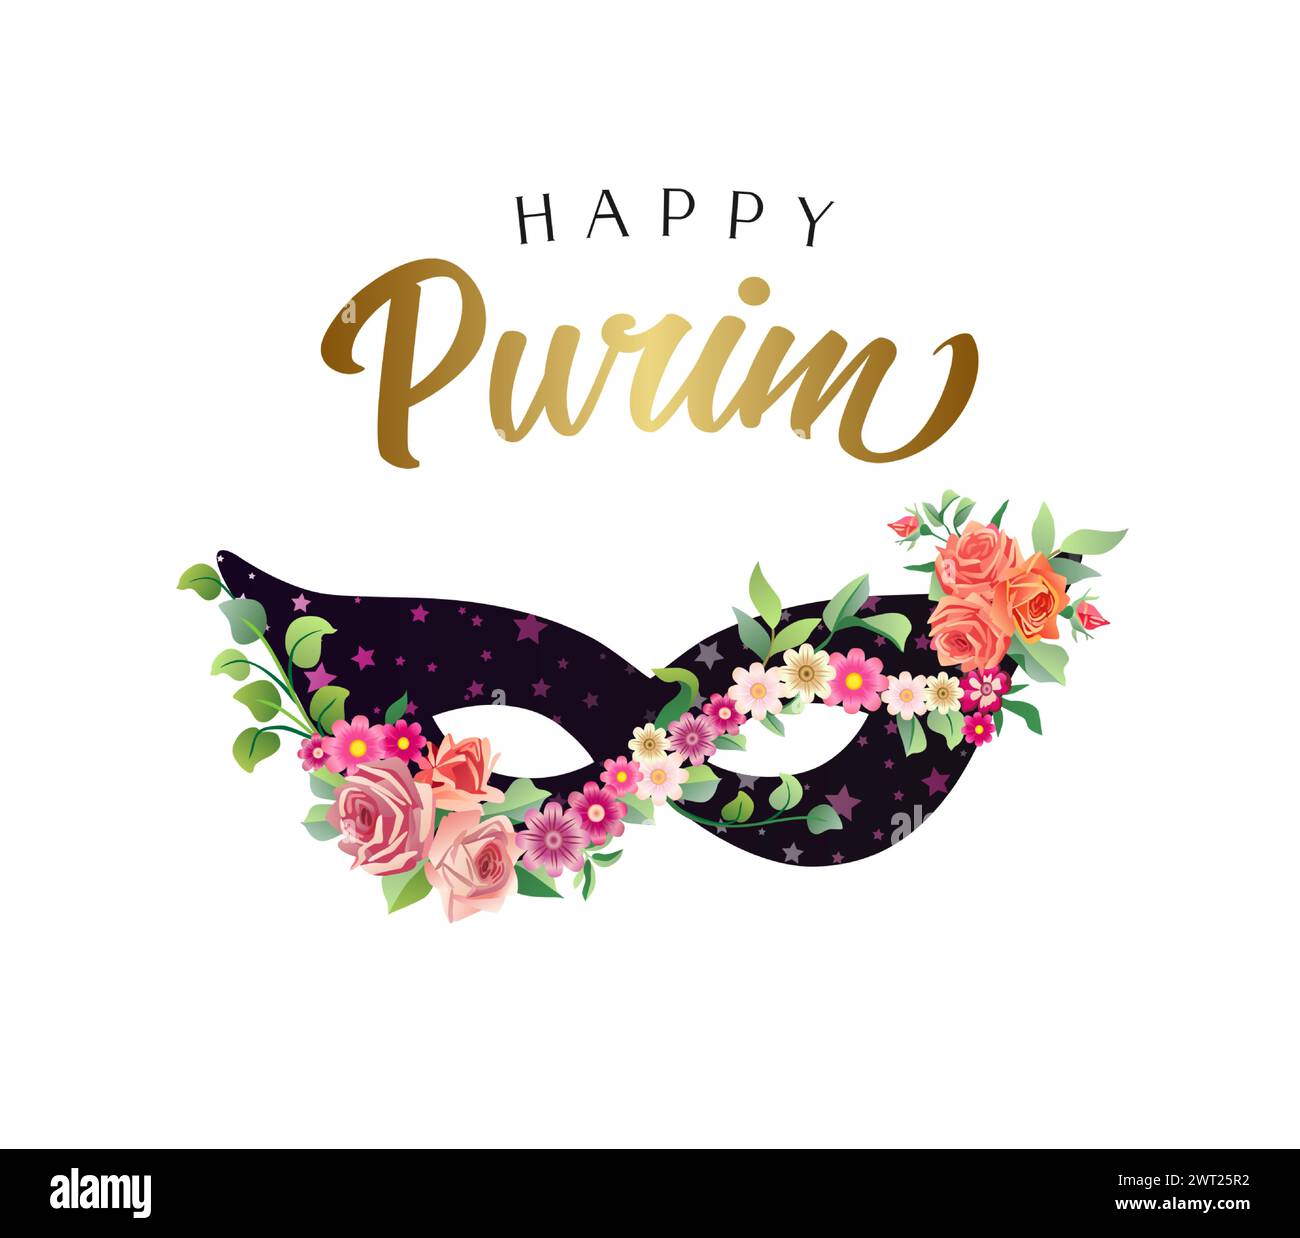 Happy Purim cute greetings. Decorative fsce mask with floral elements. Social media timeline post concept. Postcard design. Gift card template. Stock Vector